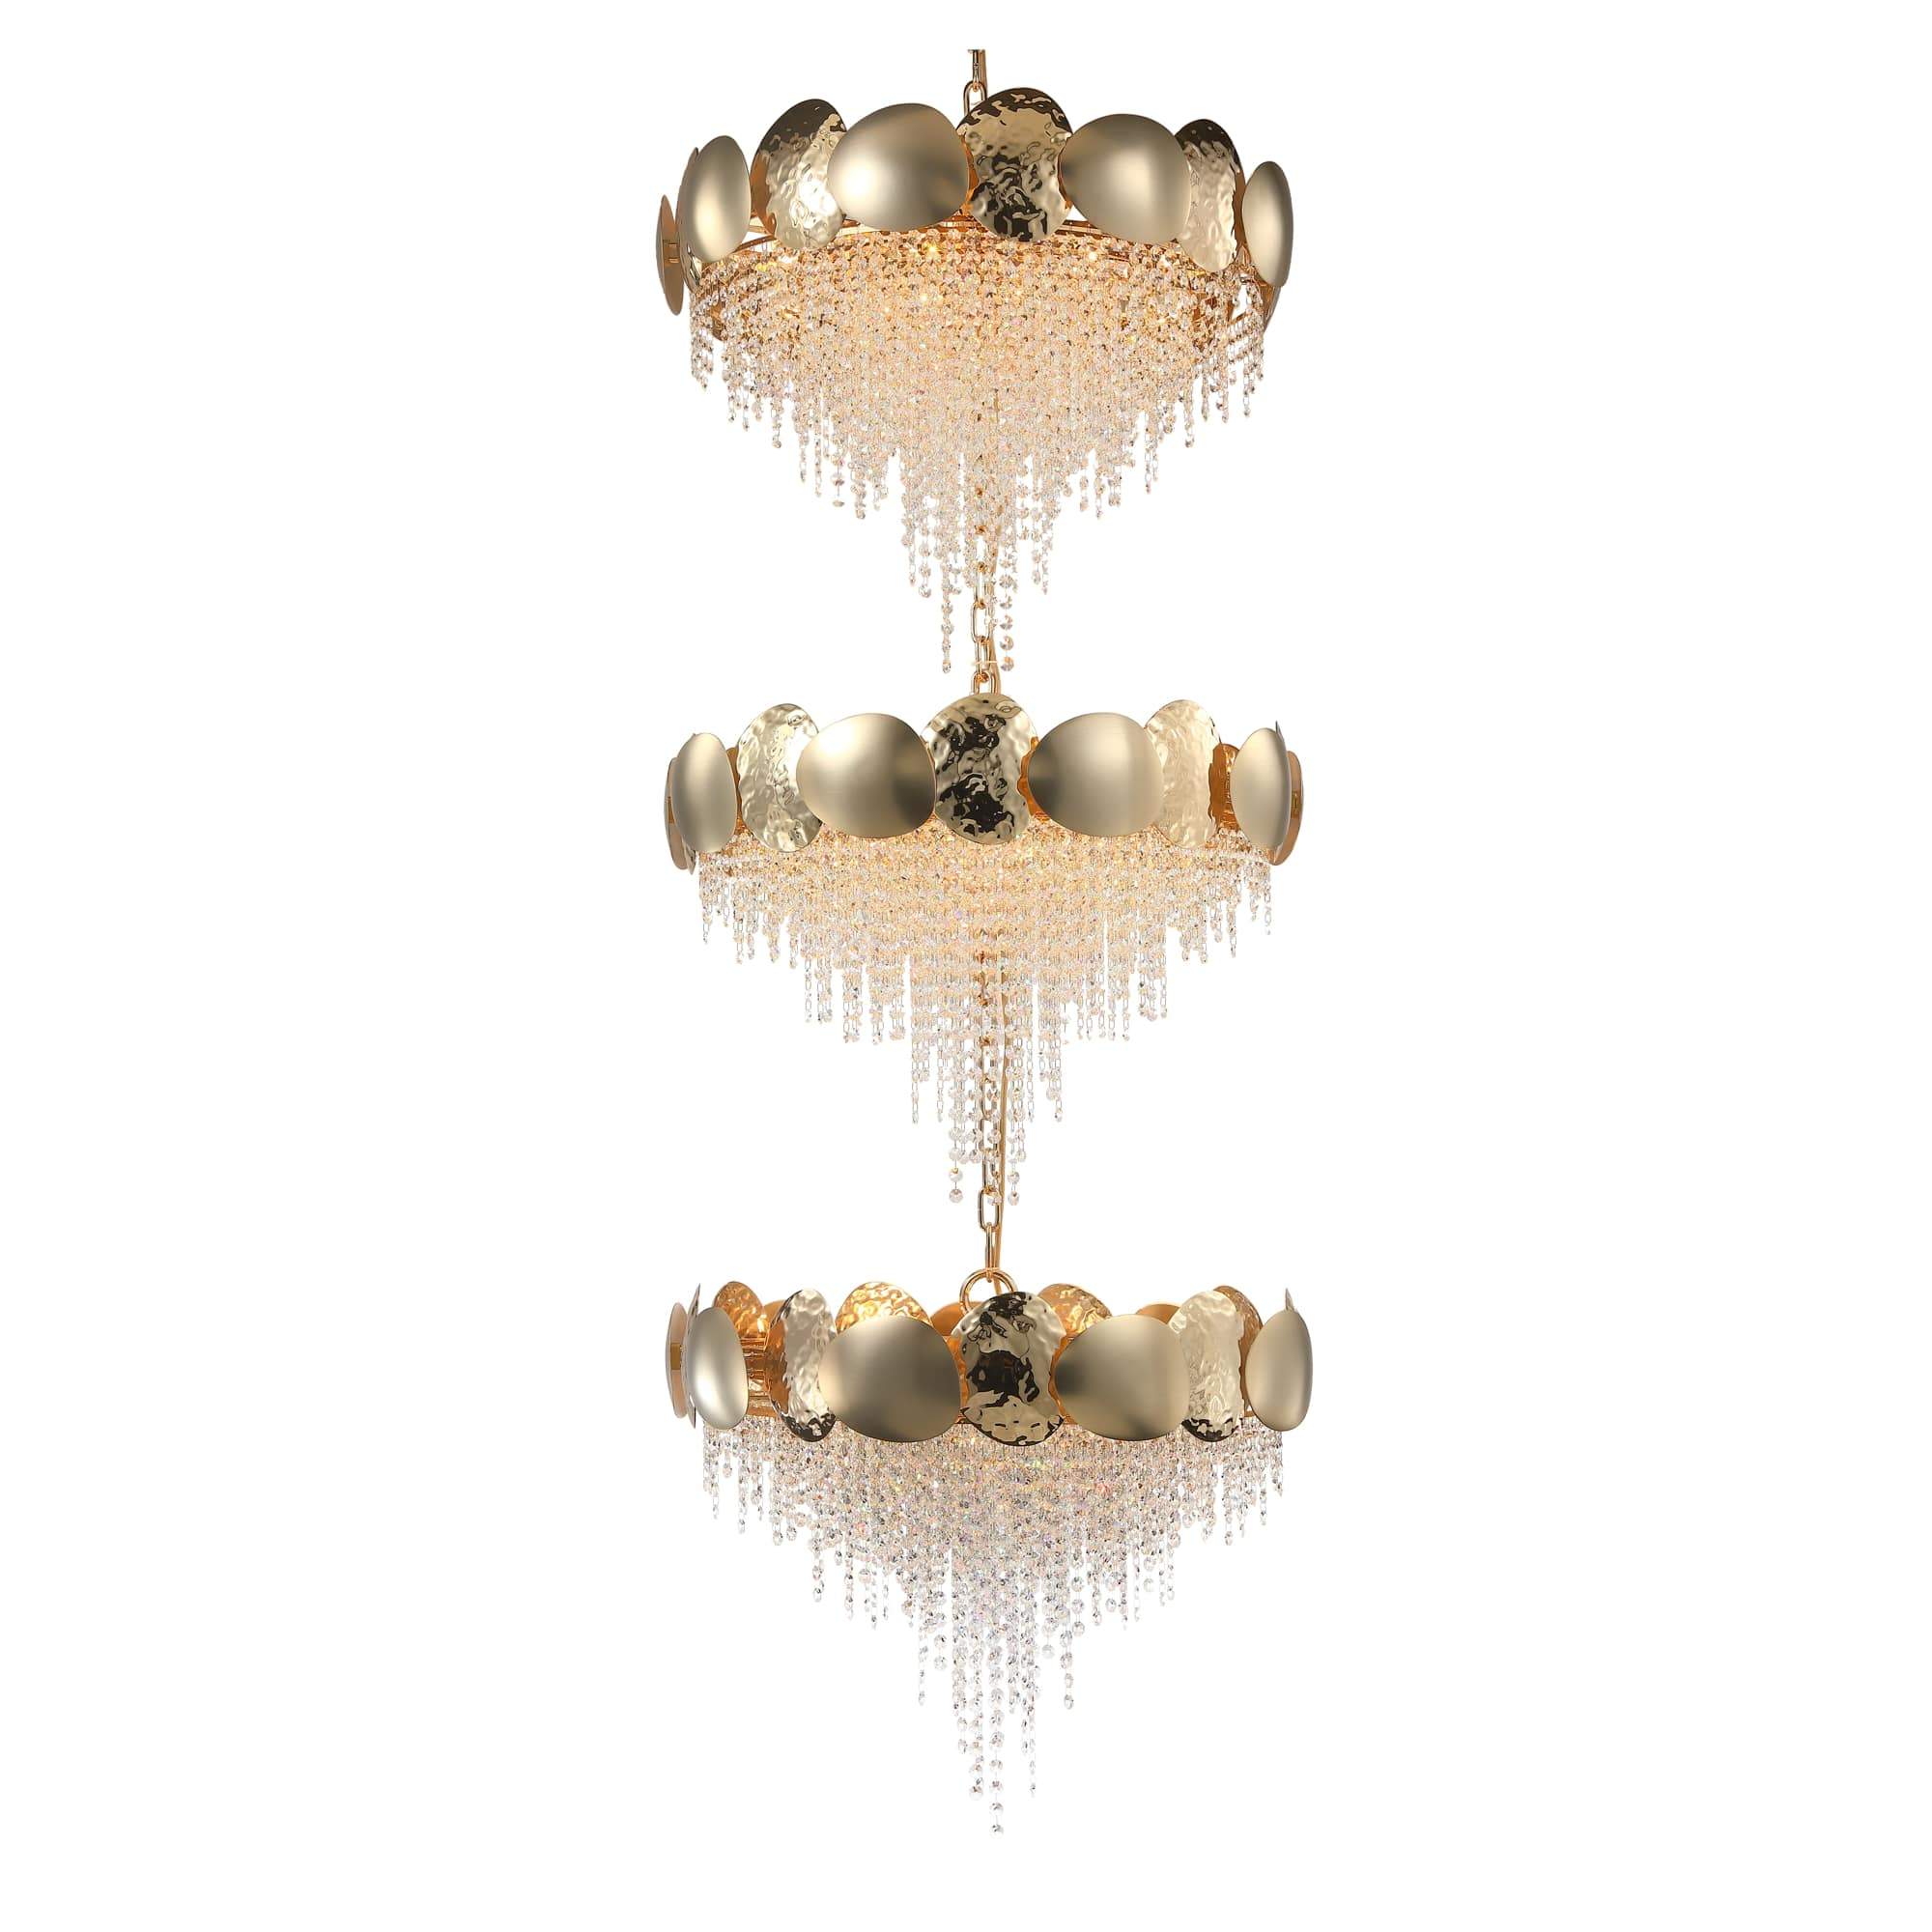 Amadeo Tiered Pendant Brass Crystal Chandelier - Italian Concept - 